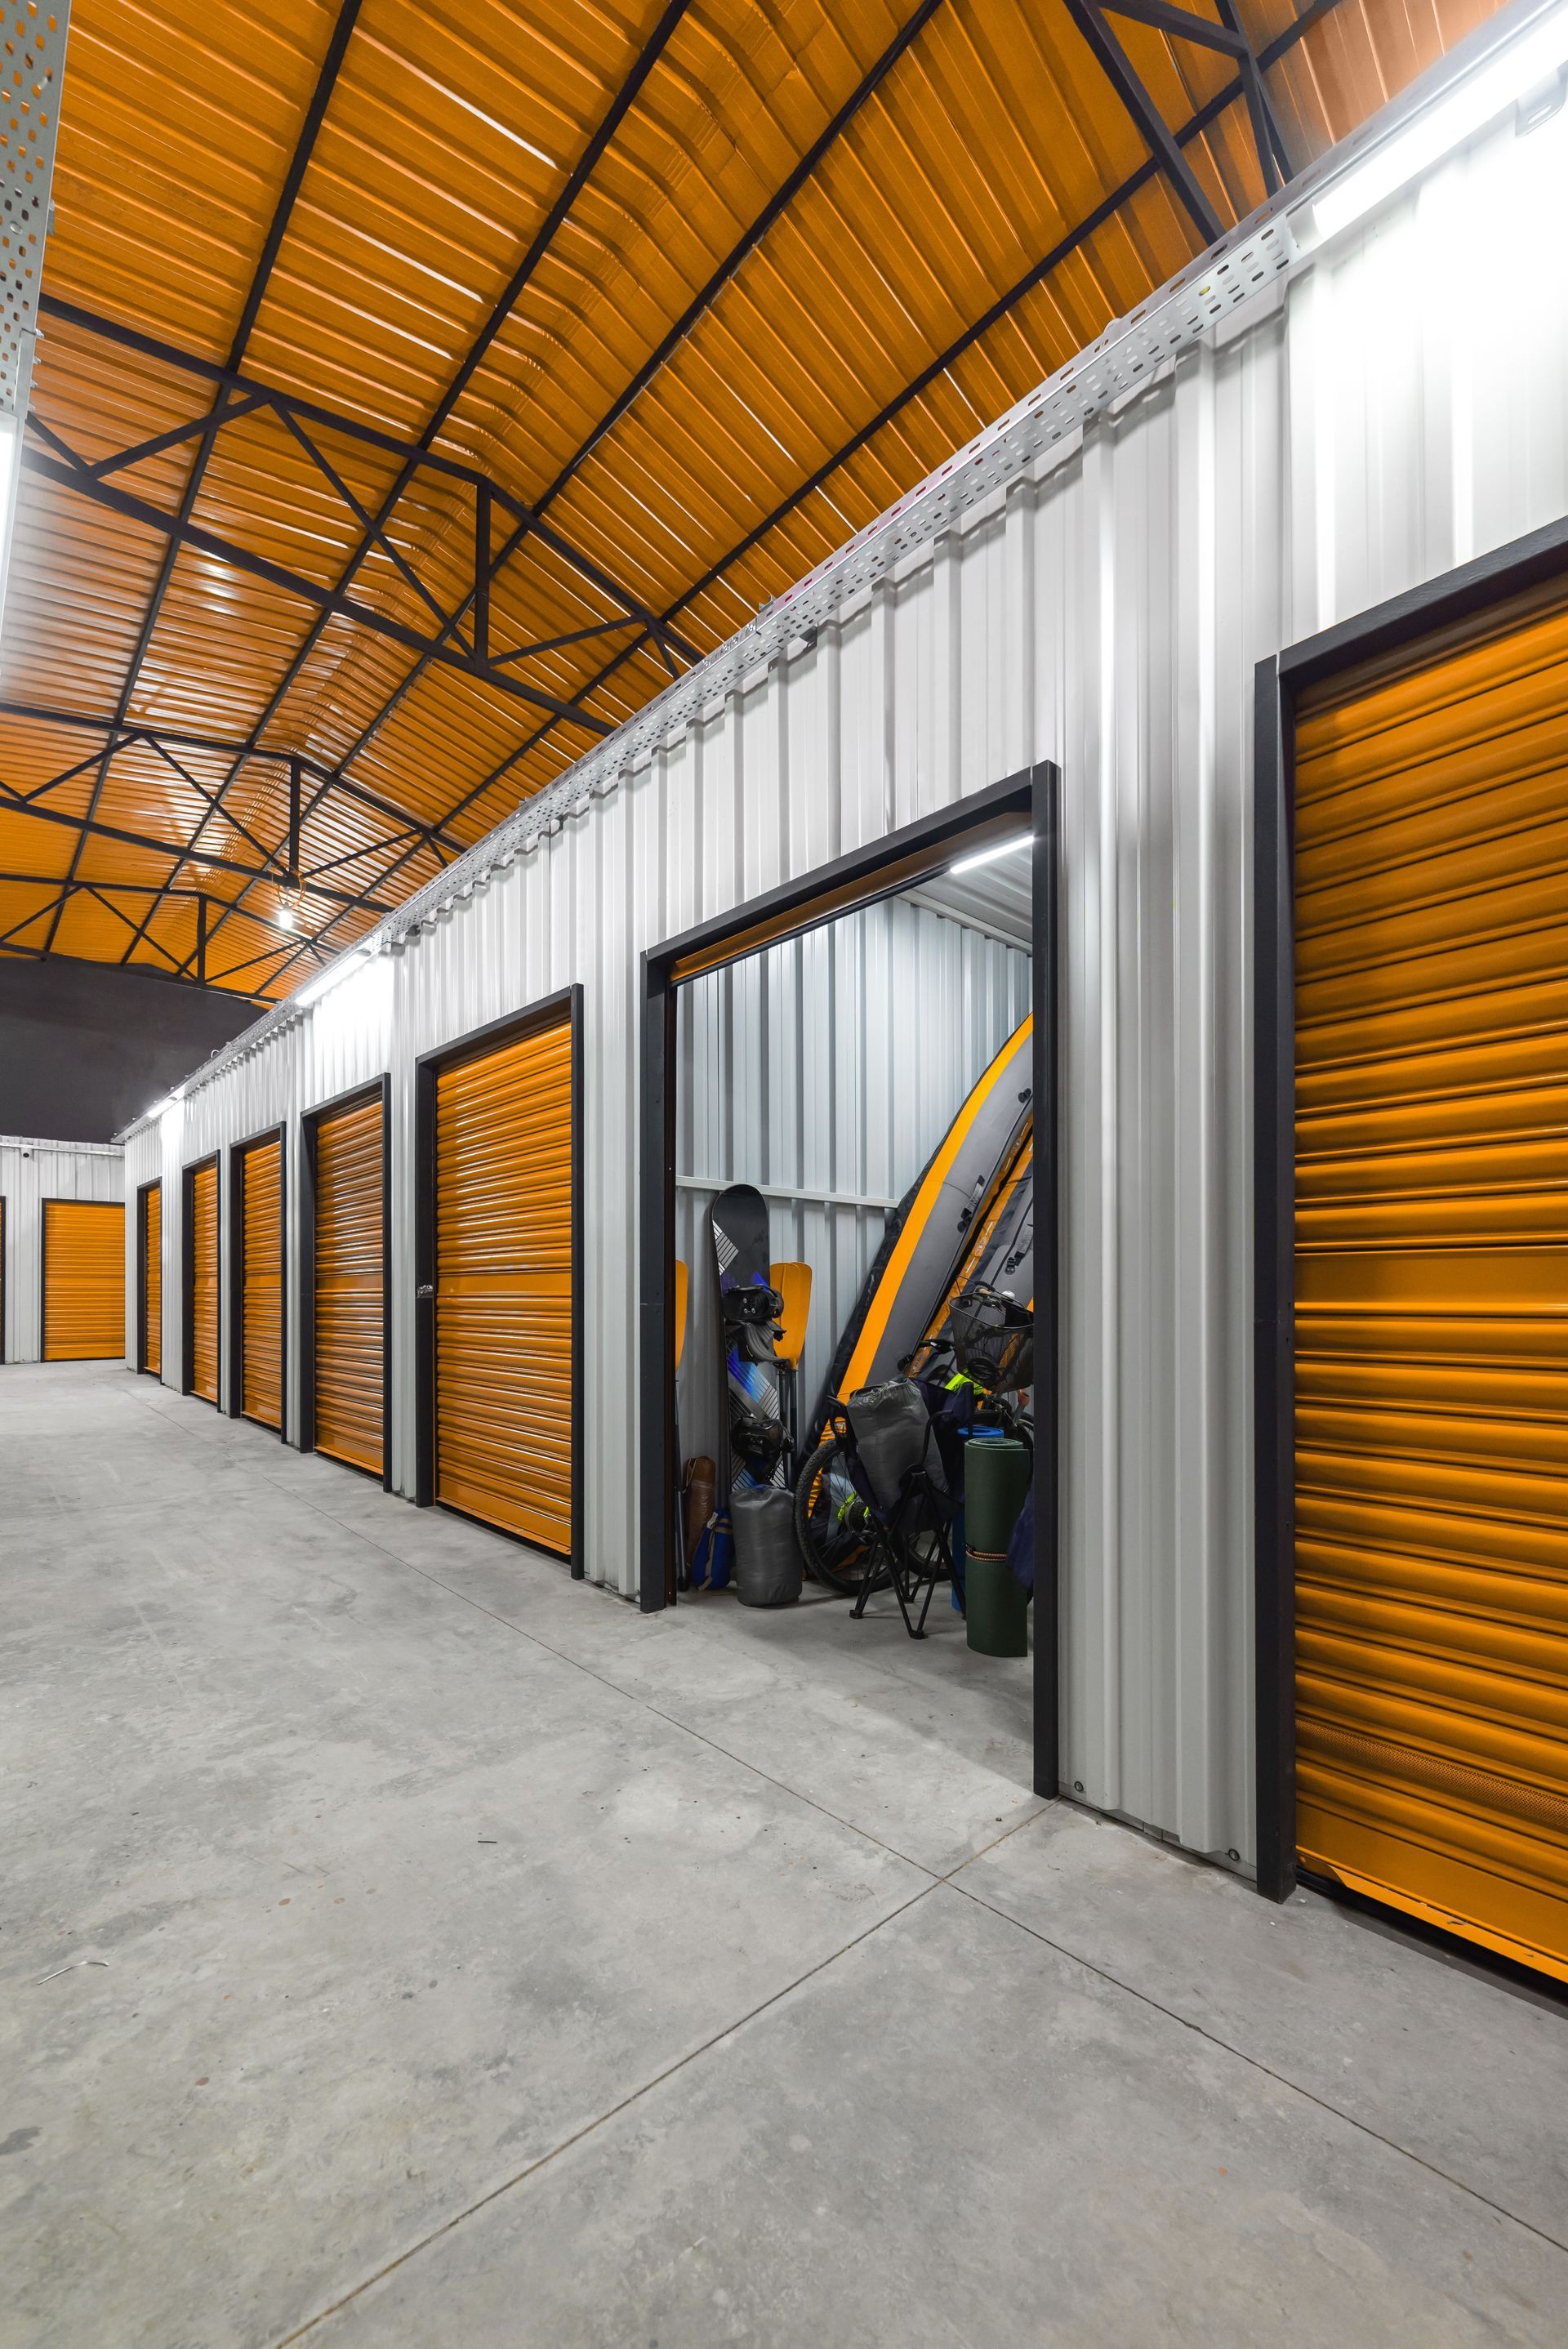 A row of storage units with orange doors and a yellow roof.